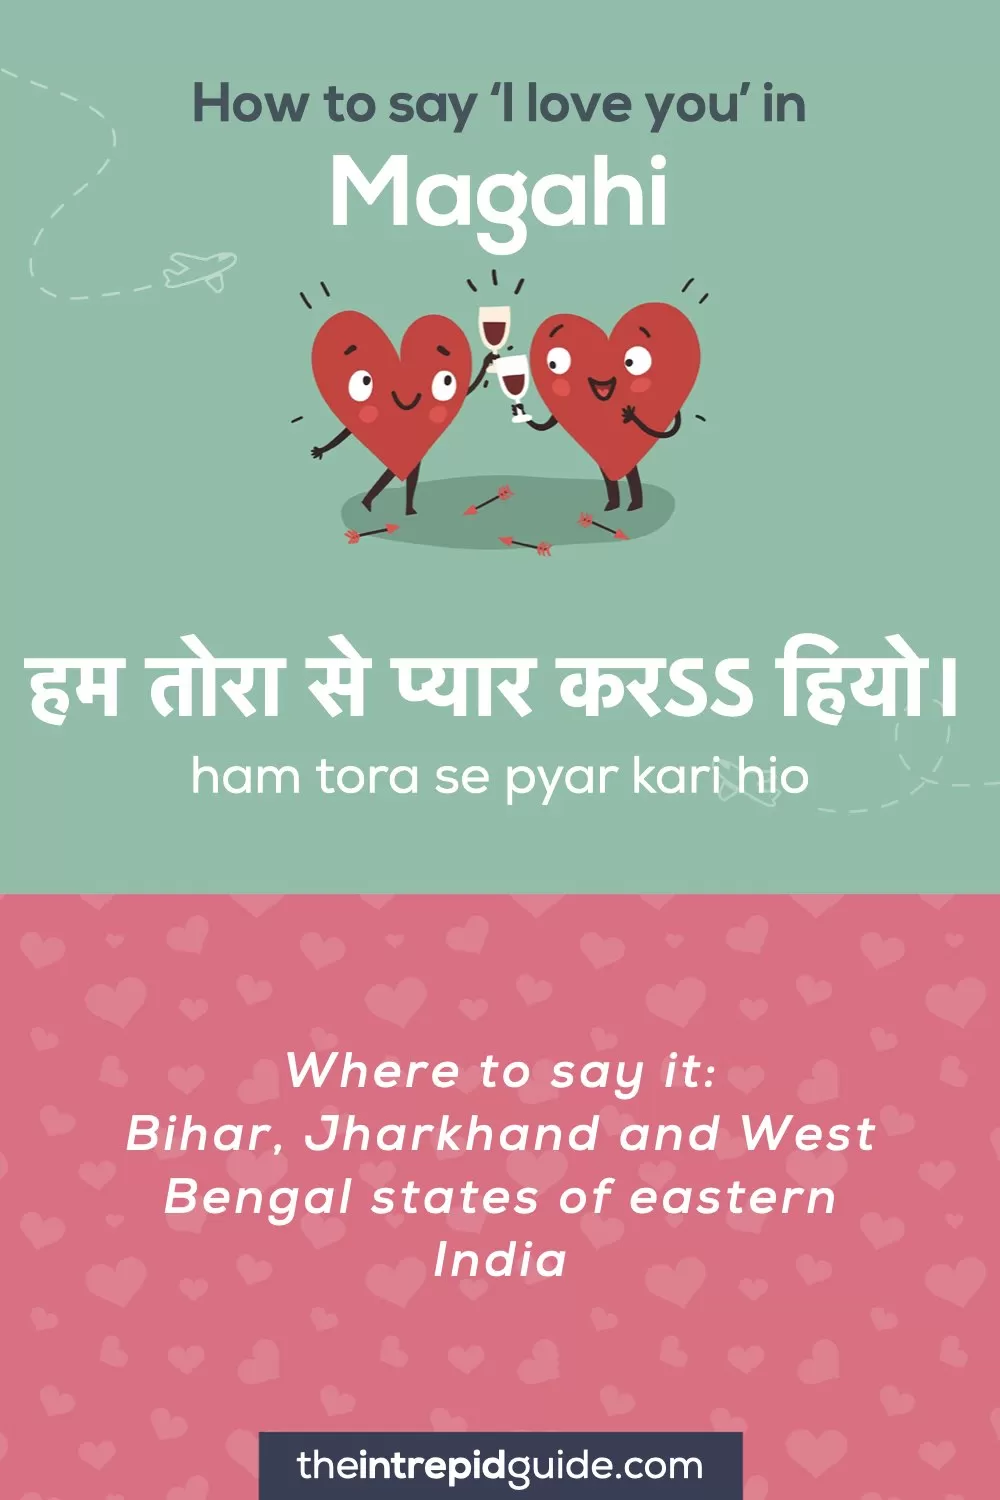 How to say I love you in different languages - Magahi - हम तोरा से प्यार करऽऽ हियो।